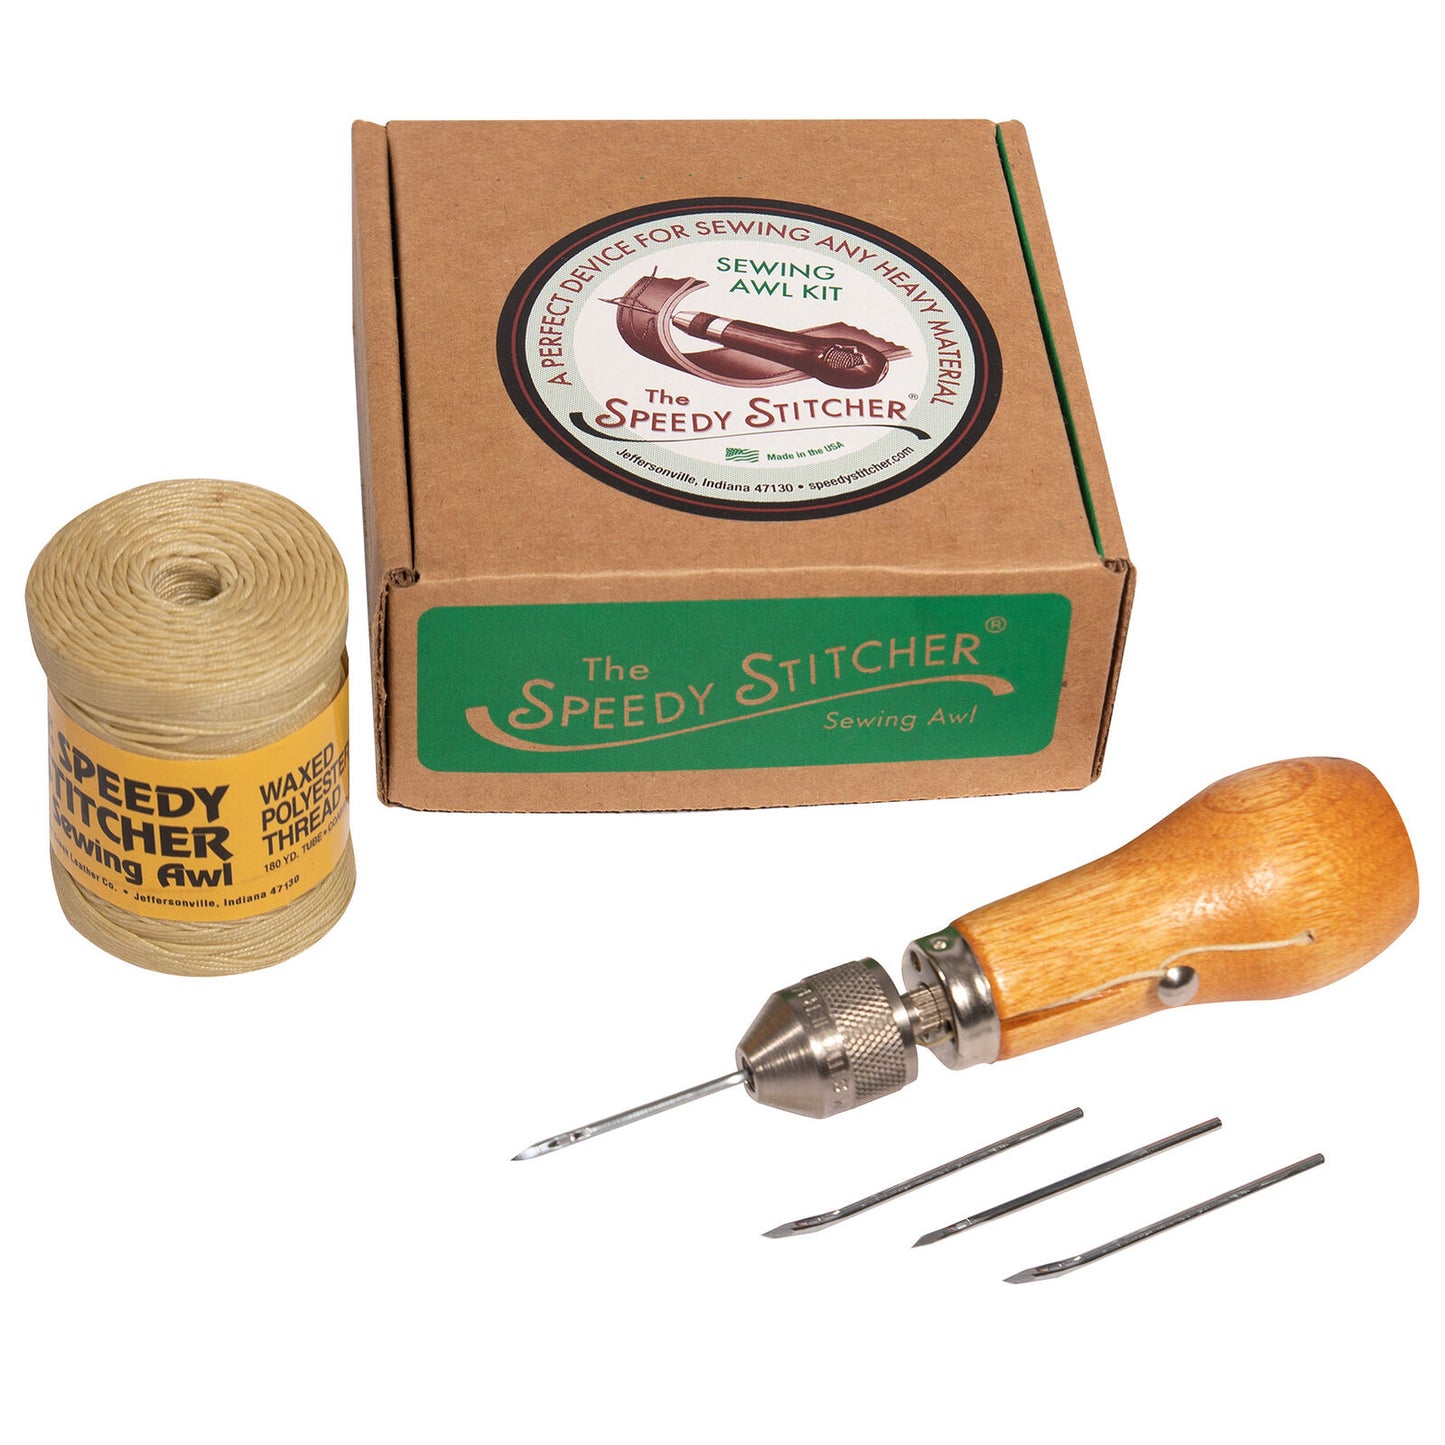 Speedy Stitcher Sewing Awl Kit - Sewing Awl, Straight & Curved Neeedles & Thread